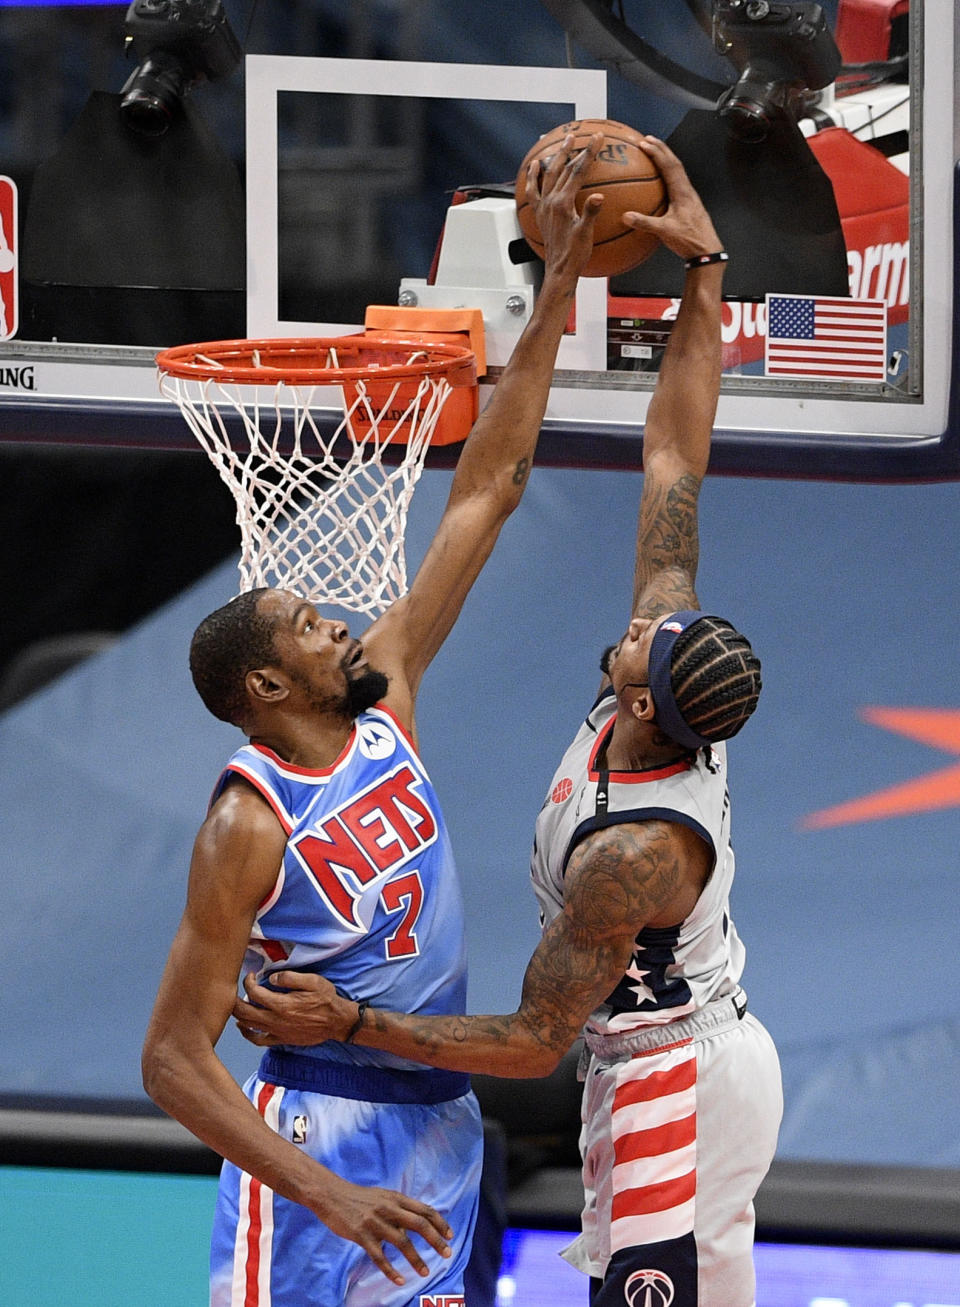 Washington Wizards guard Bradley Beal, right, goes to the basket as Brooklyn Nets forward Kevin Durant, left, defends during the second half of an NBA basketball game, Sunday, Jan. 31, 2021, in Washington. (AP Photo/Nick Wass)